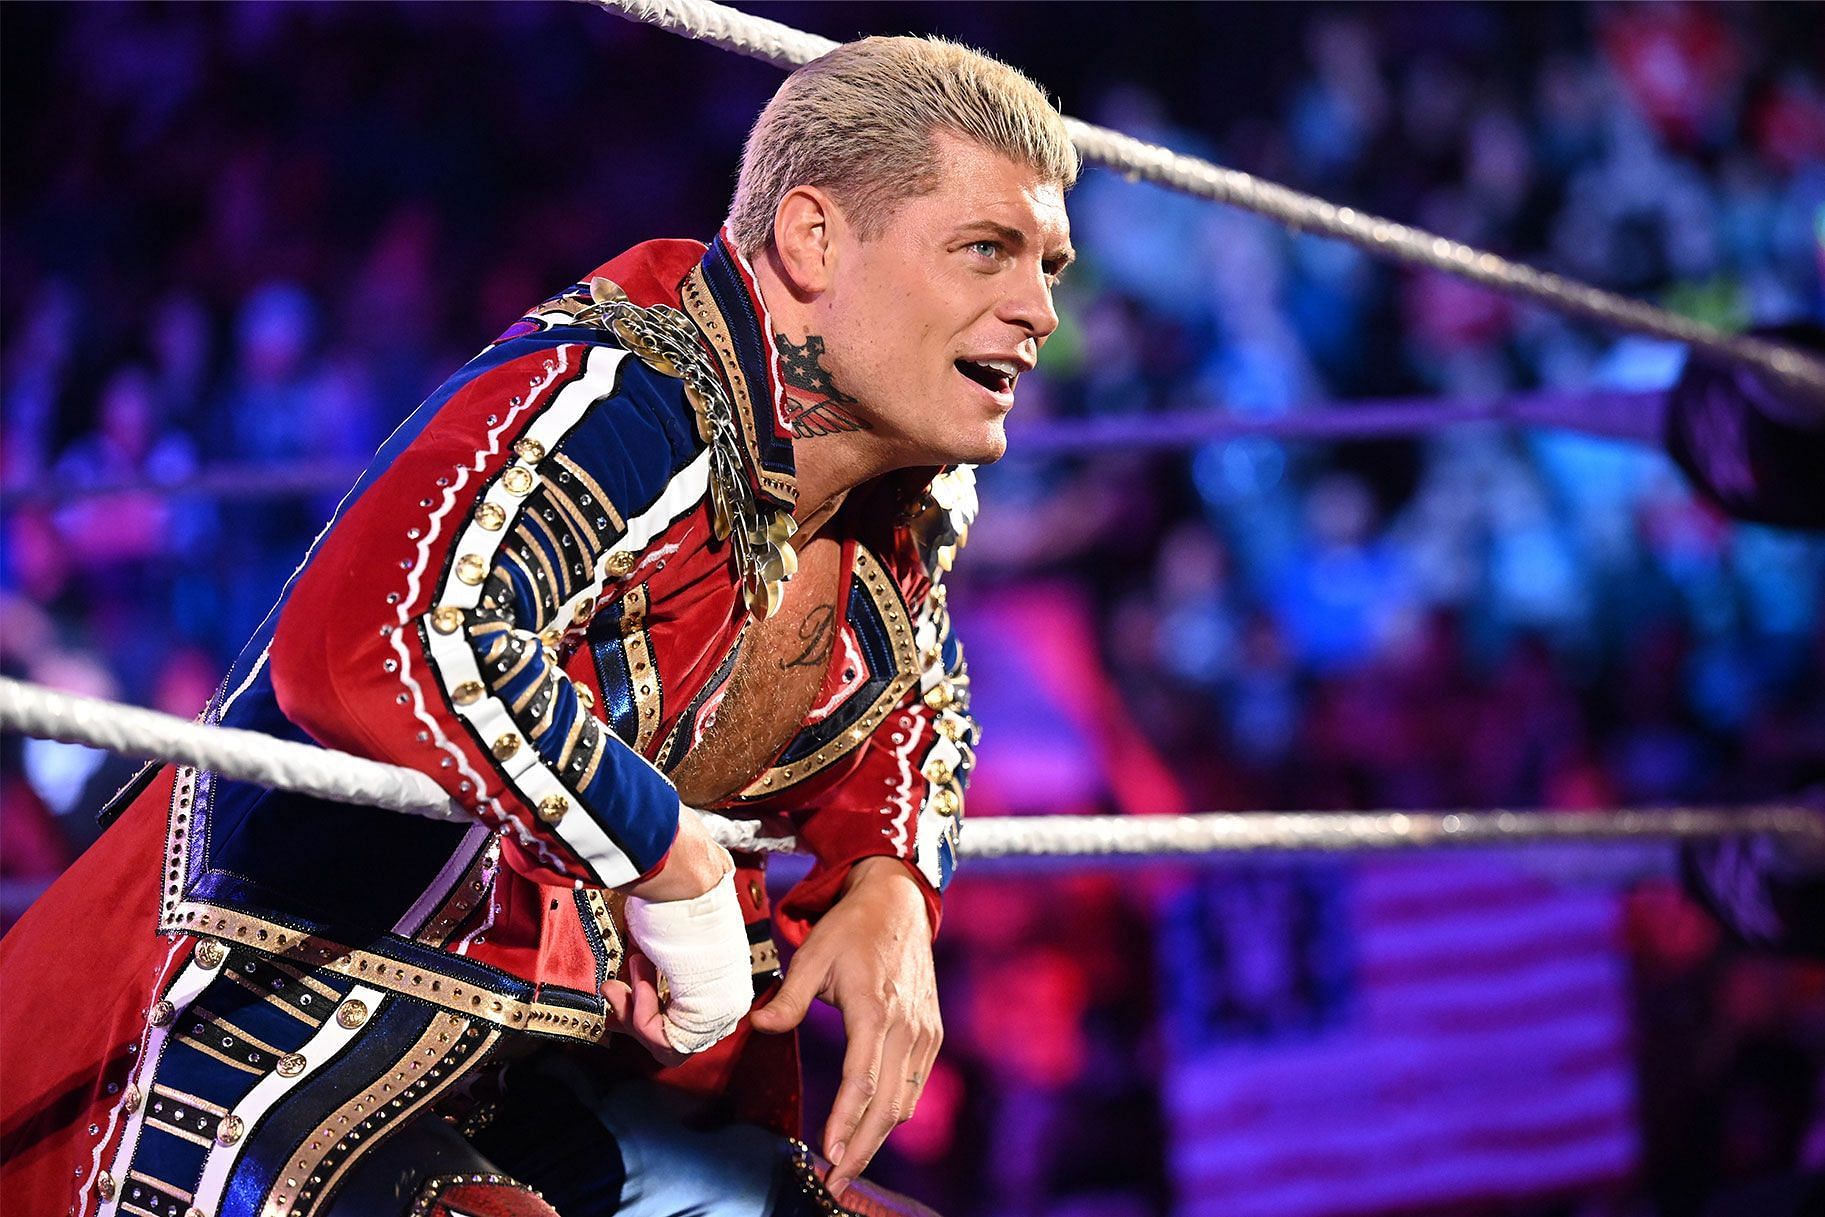 MJF could battle with or against Rhodes if he joins WWE.